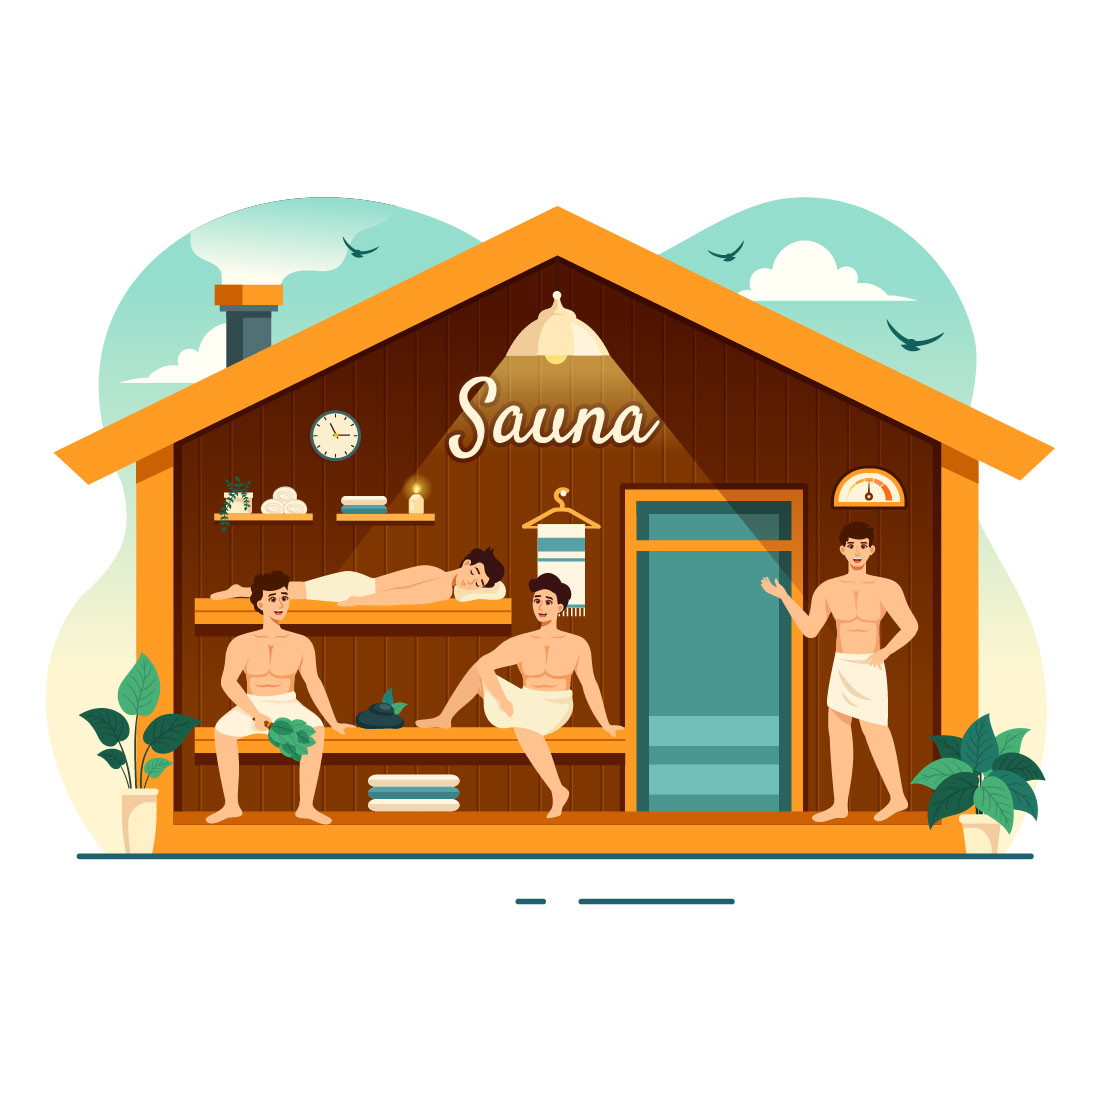 9 Sauna and Steam Room Illustration cover image.